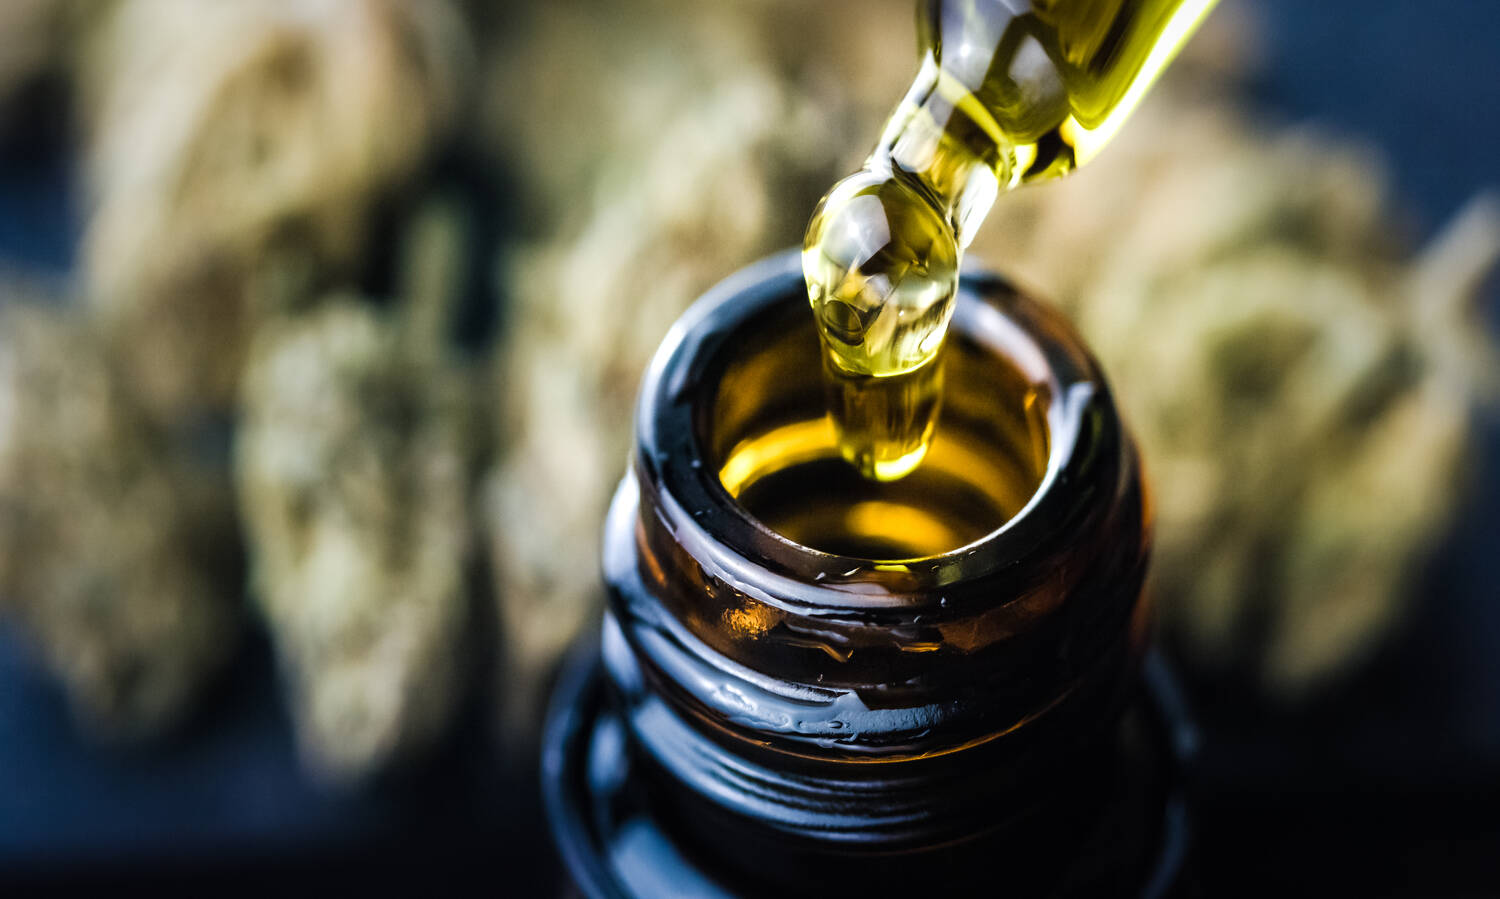 What’s The Difference Between CBD From Hemp And CBD From Cannabis?